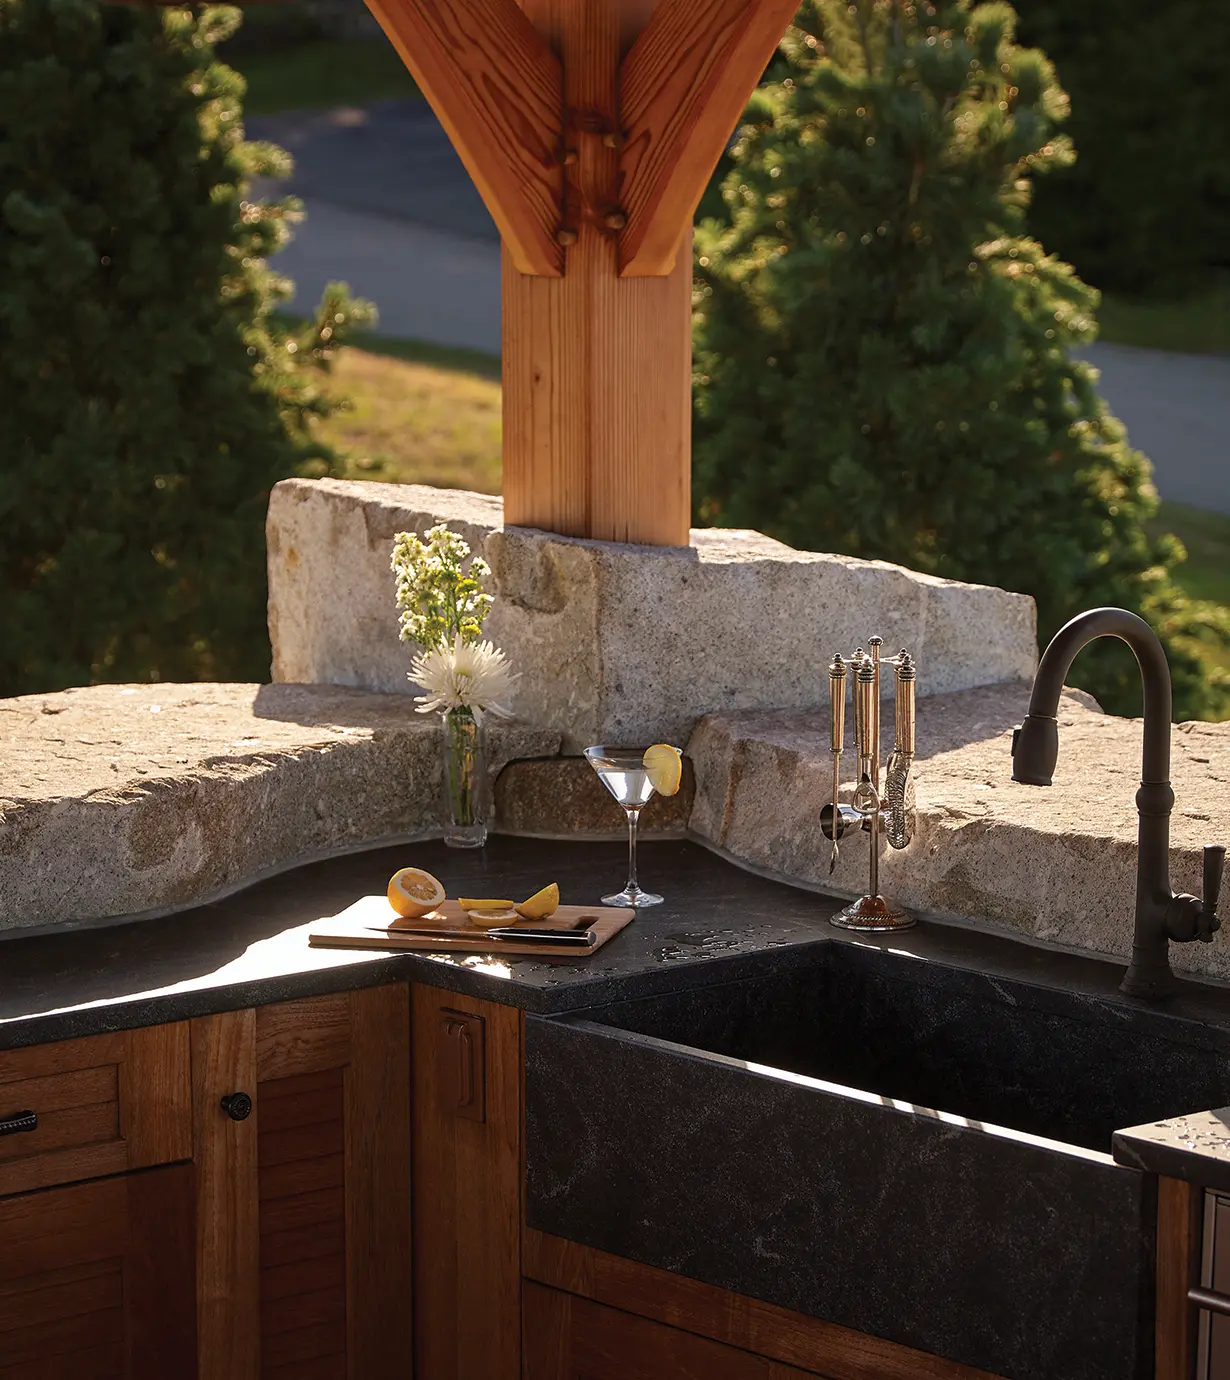 Outdoor sink and bar made from local stone